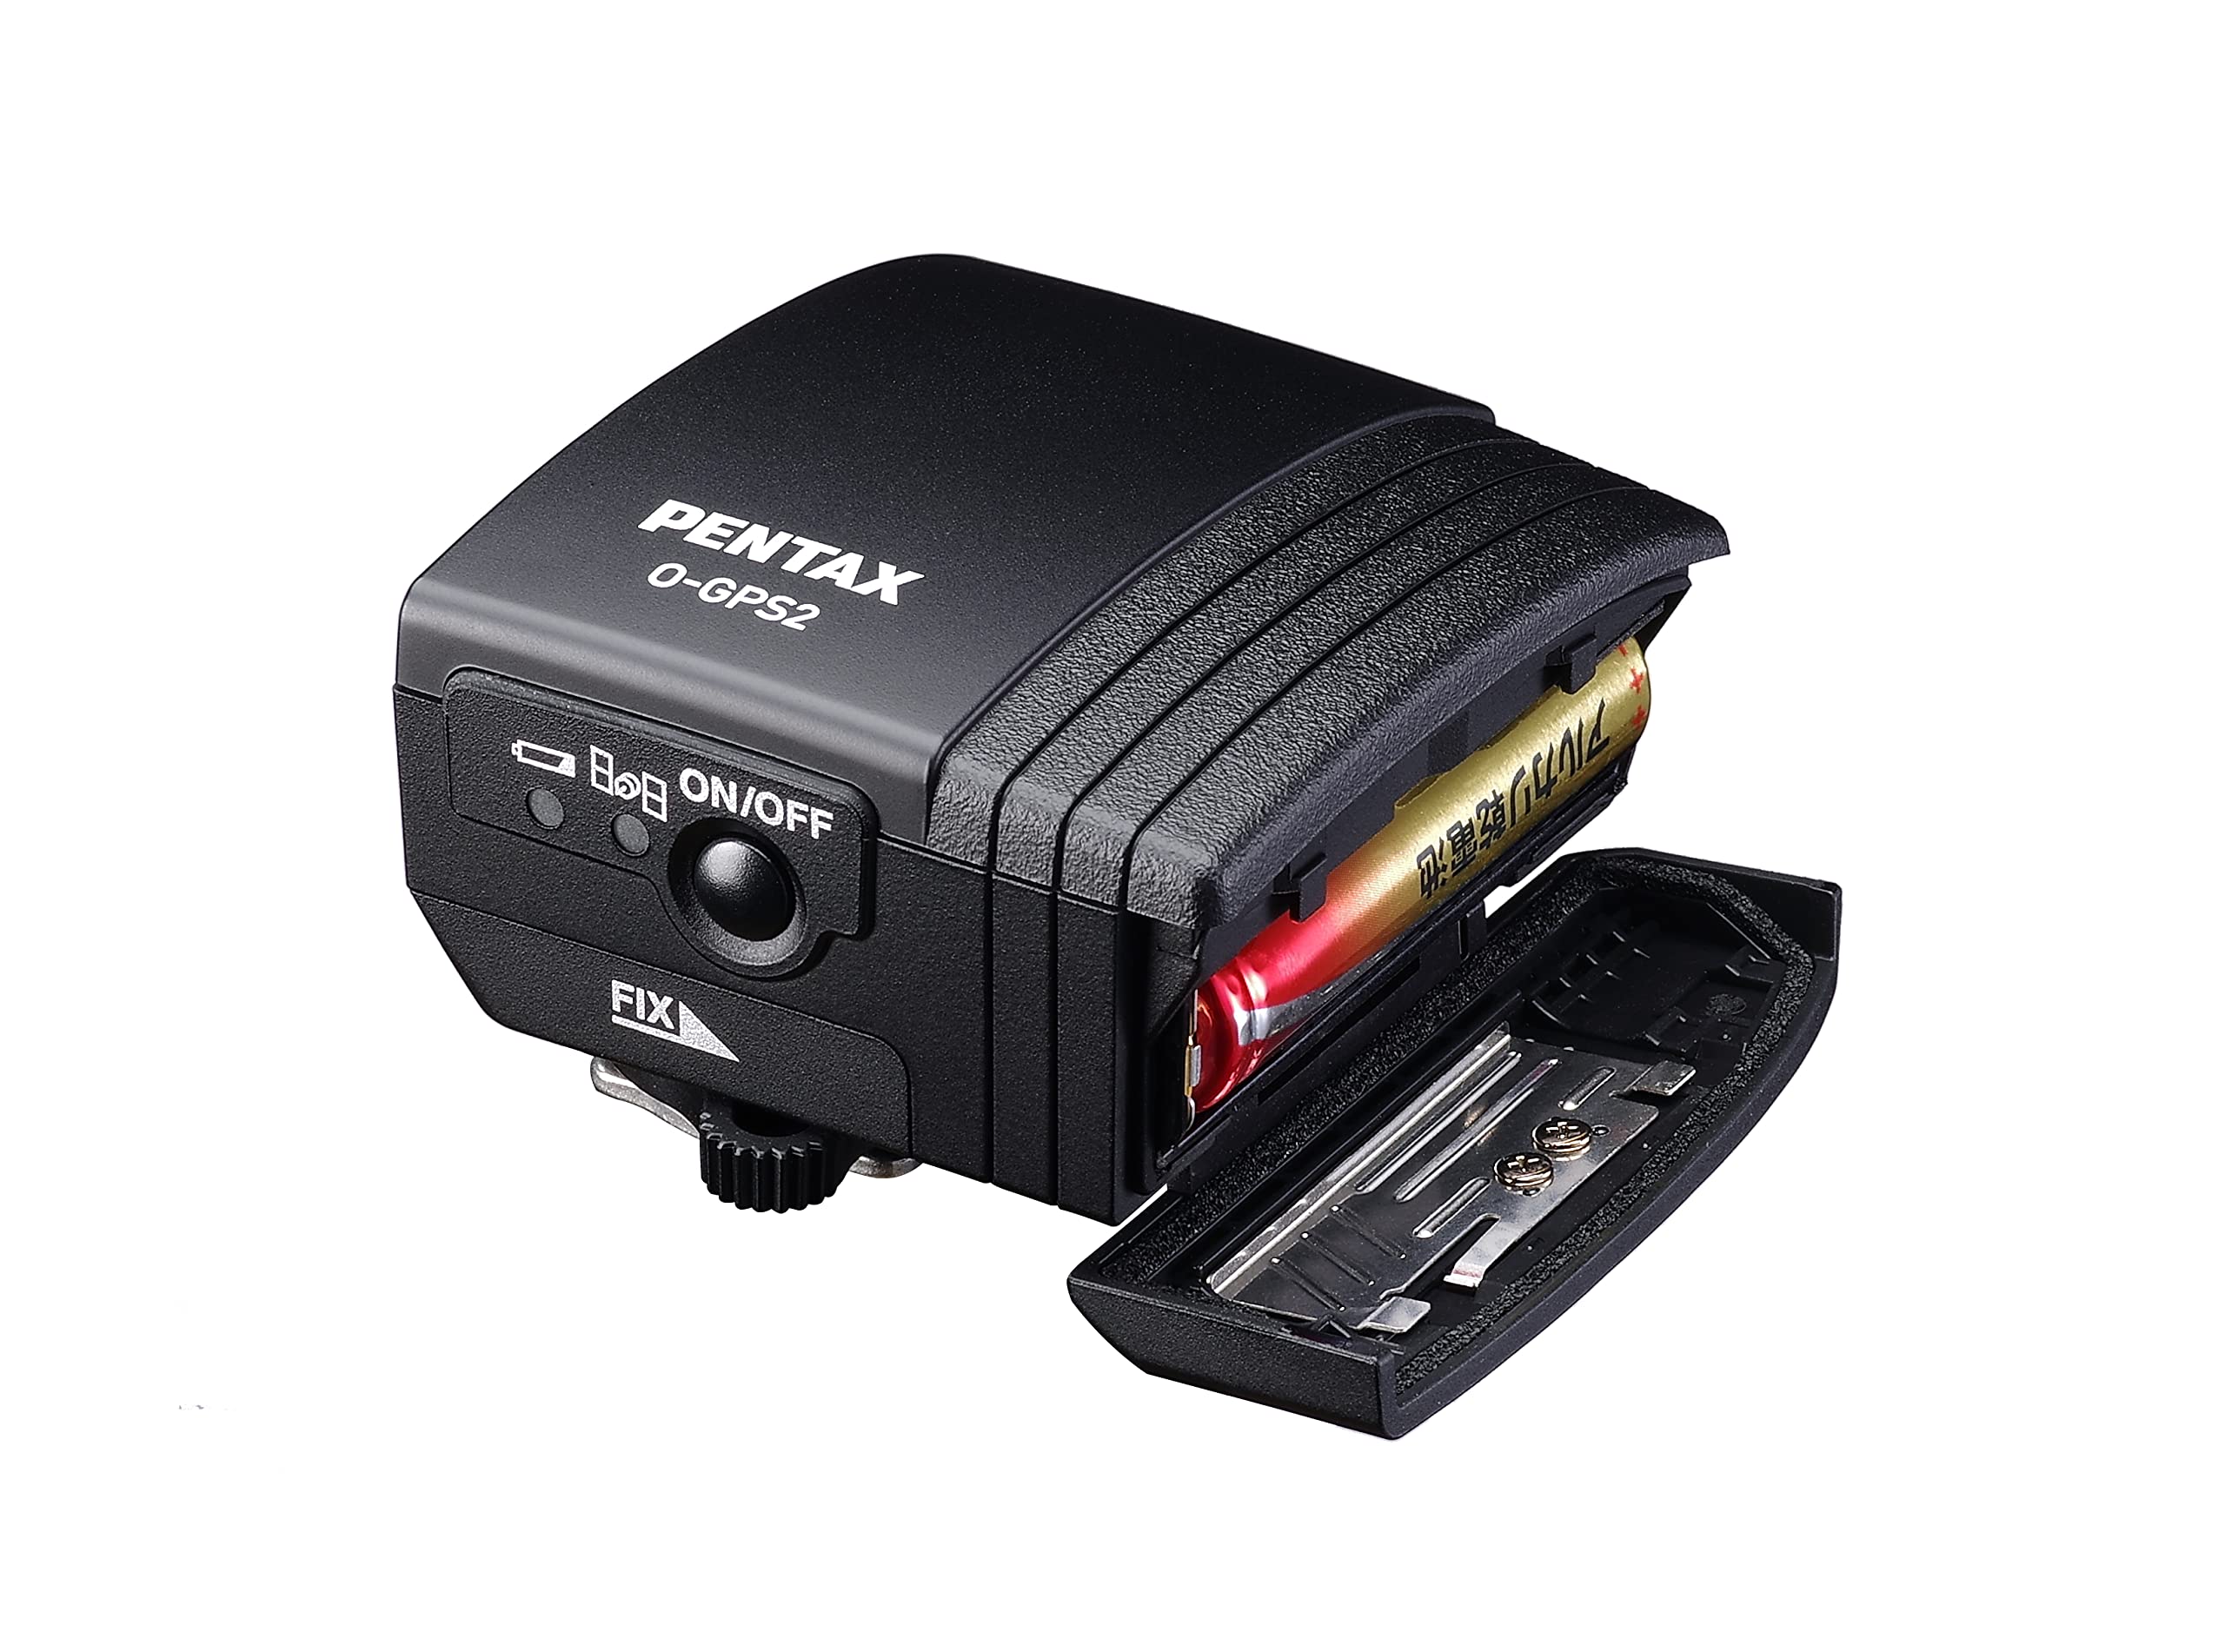 PENTAX O-GPS2 Handy GPS Unit with ASTROTRACER, Simple Navigation, Electronic Compass. Simplified Weather-Resistant Construction (30364)